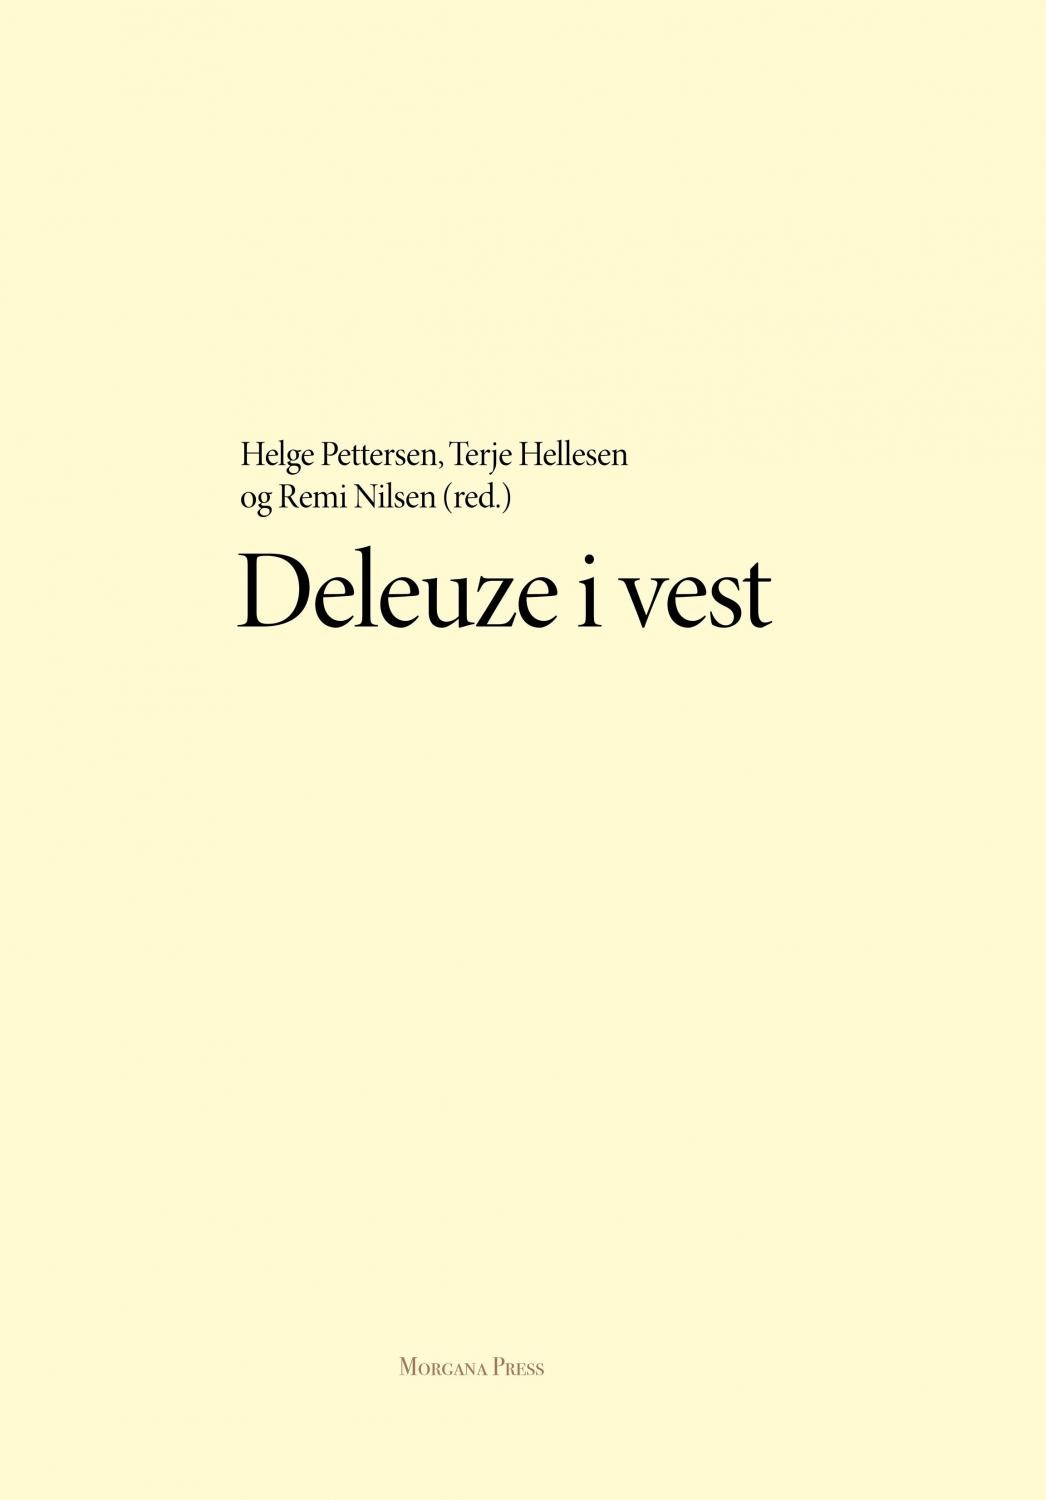 You are currently viewing Bokanmeldelse: Deleuze i vest.